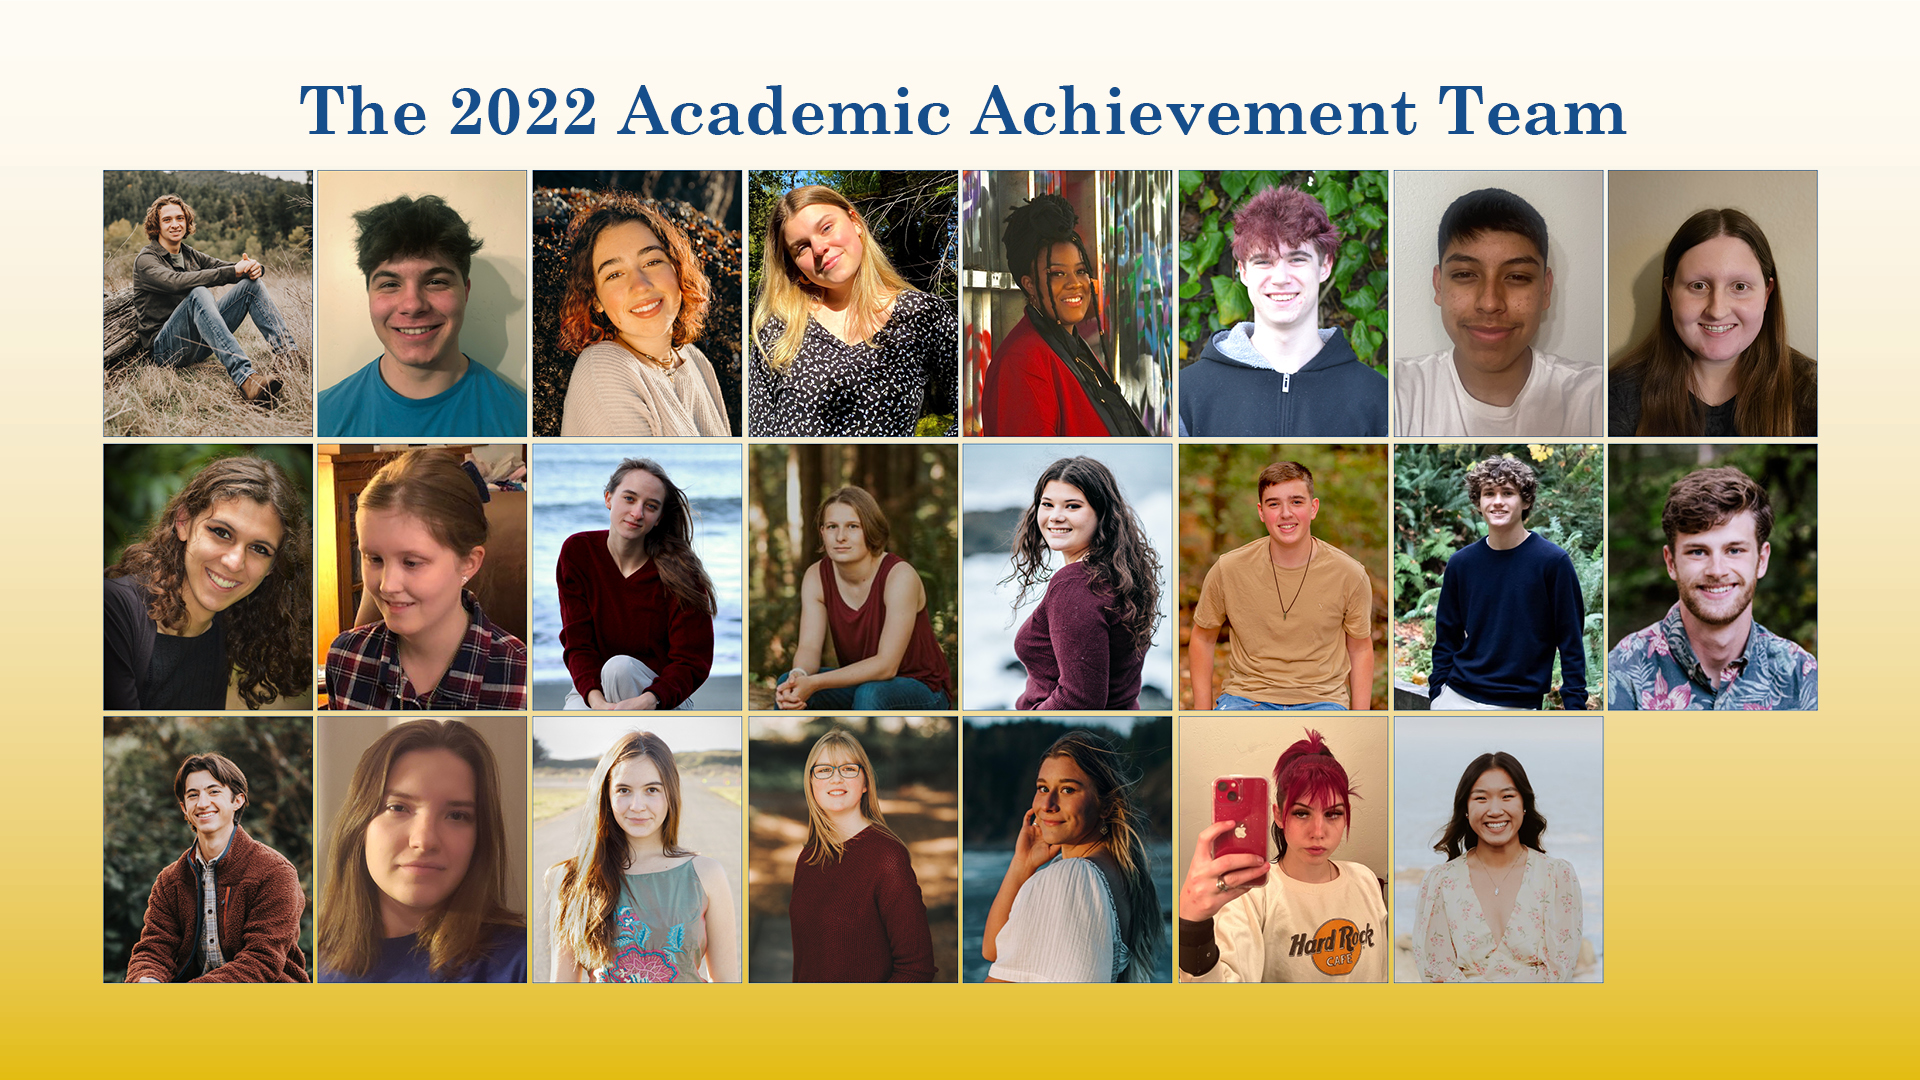 Collage of the 2022 Academic Achievement Team